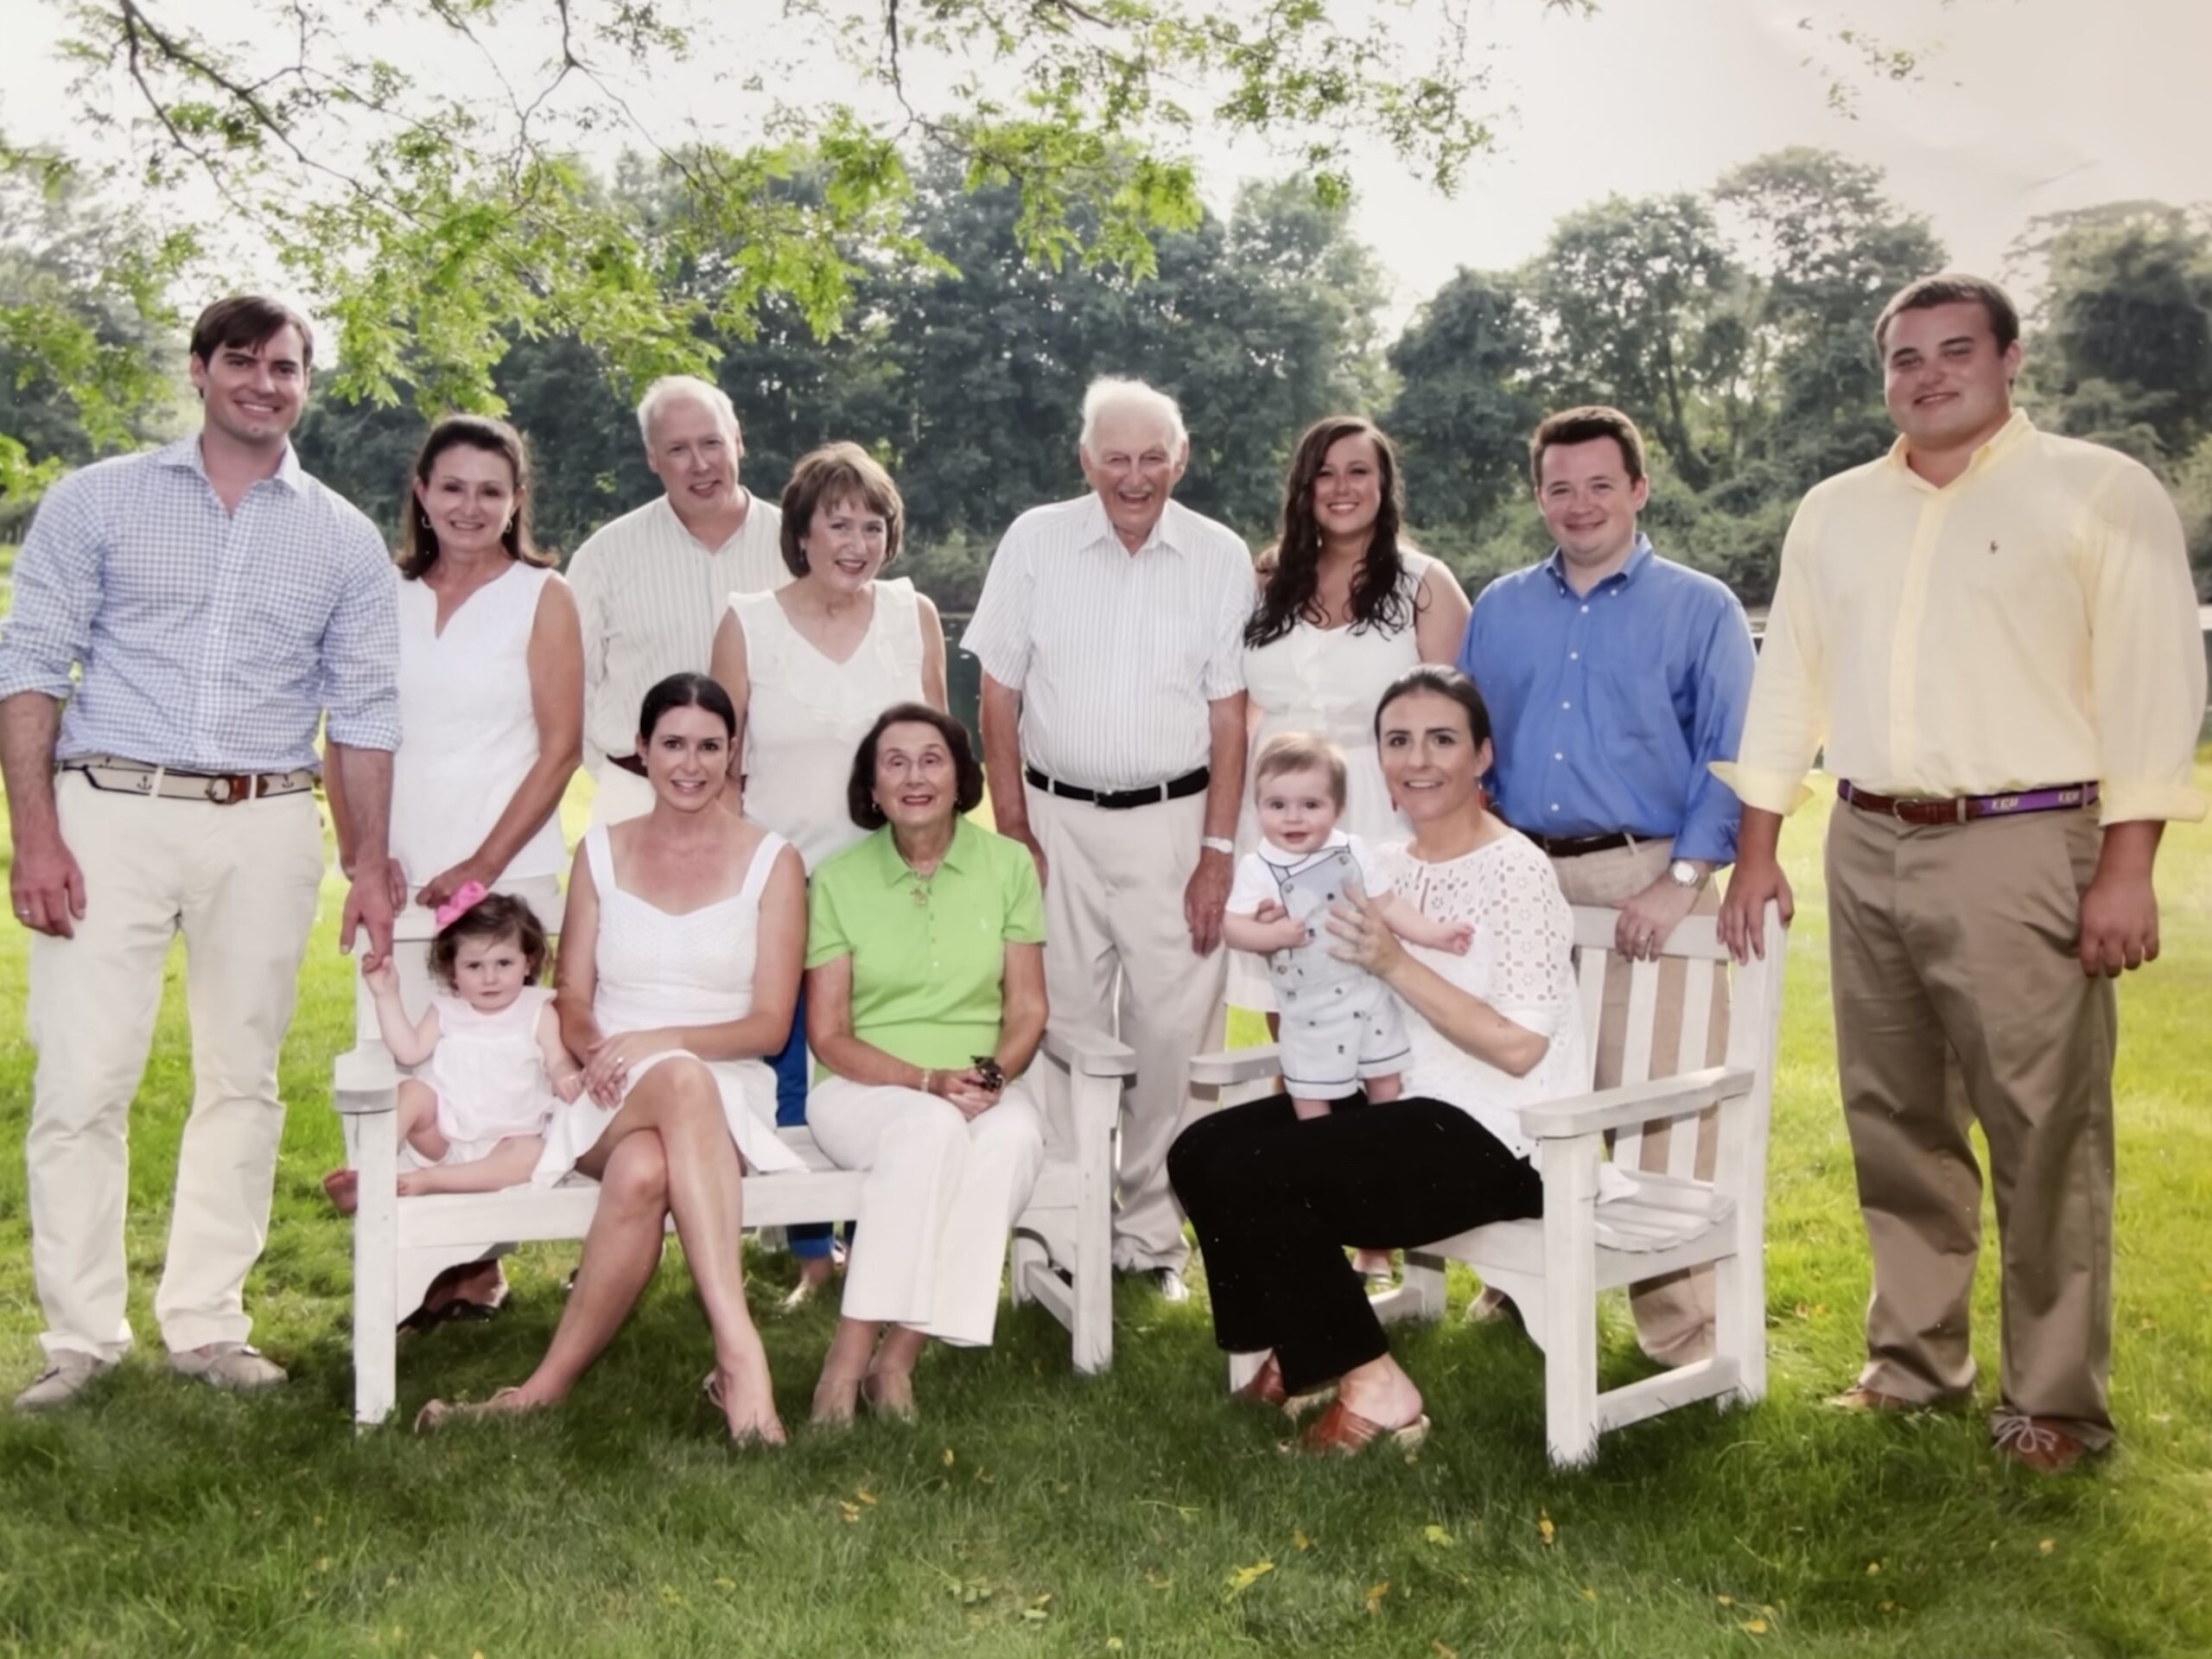 A 65th wedding anniversary reunion. Back row, from left, Elliot Weiss, Lisa Duryea Thayer, Barry Bowman, Jane Duryea Bowman, John C. Duryea, Rachel Bowman, Ted Dickson and Jonathan Bowman. Front row, from left, Lillien Weiss, Lauren Thayer Weiss, Raemary C. Duryea, Louie Dickson and Erin Thayer Dickson. COURTESY LISA DURYEA THAYER